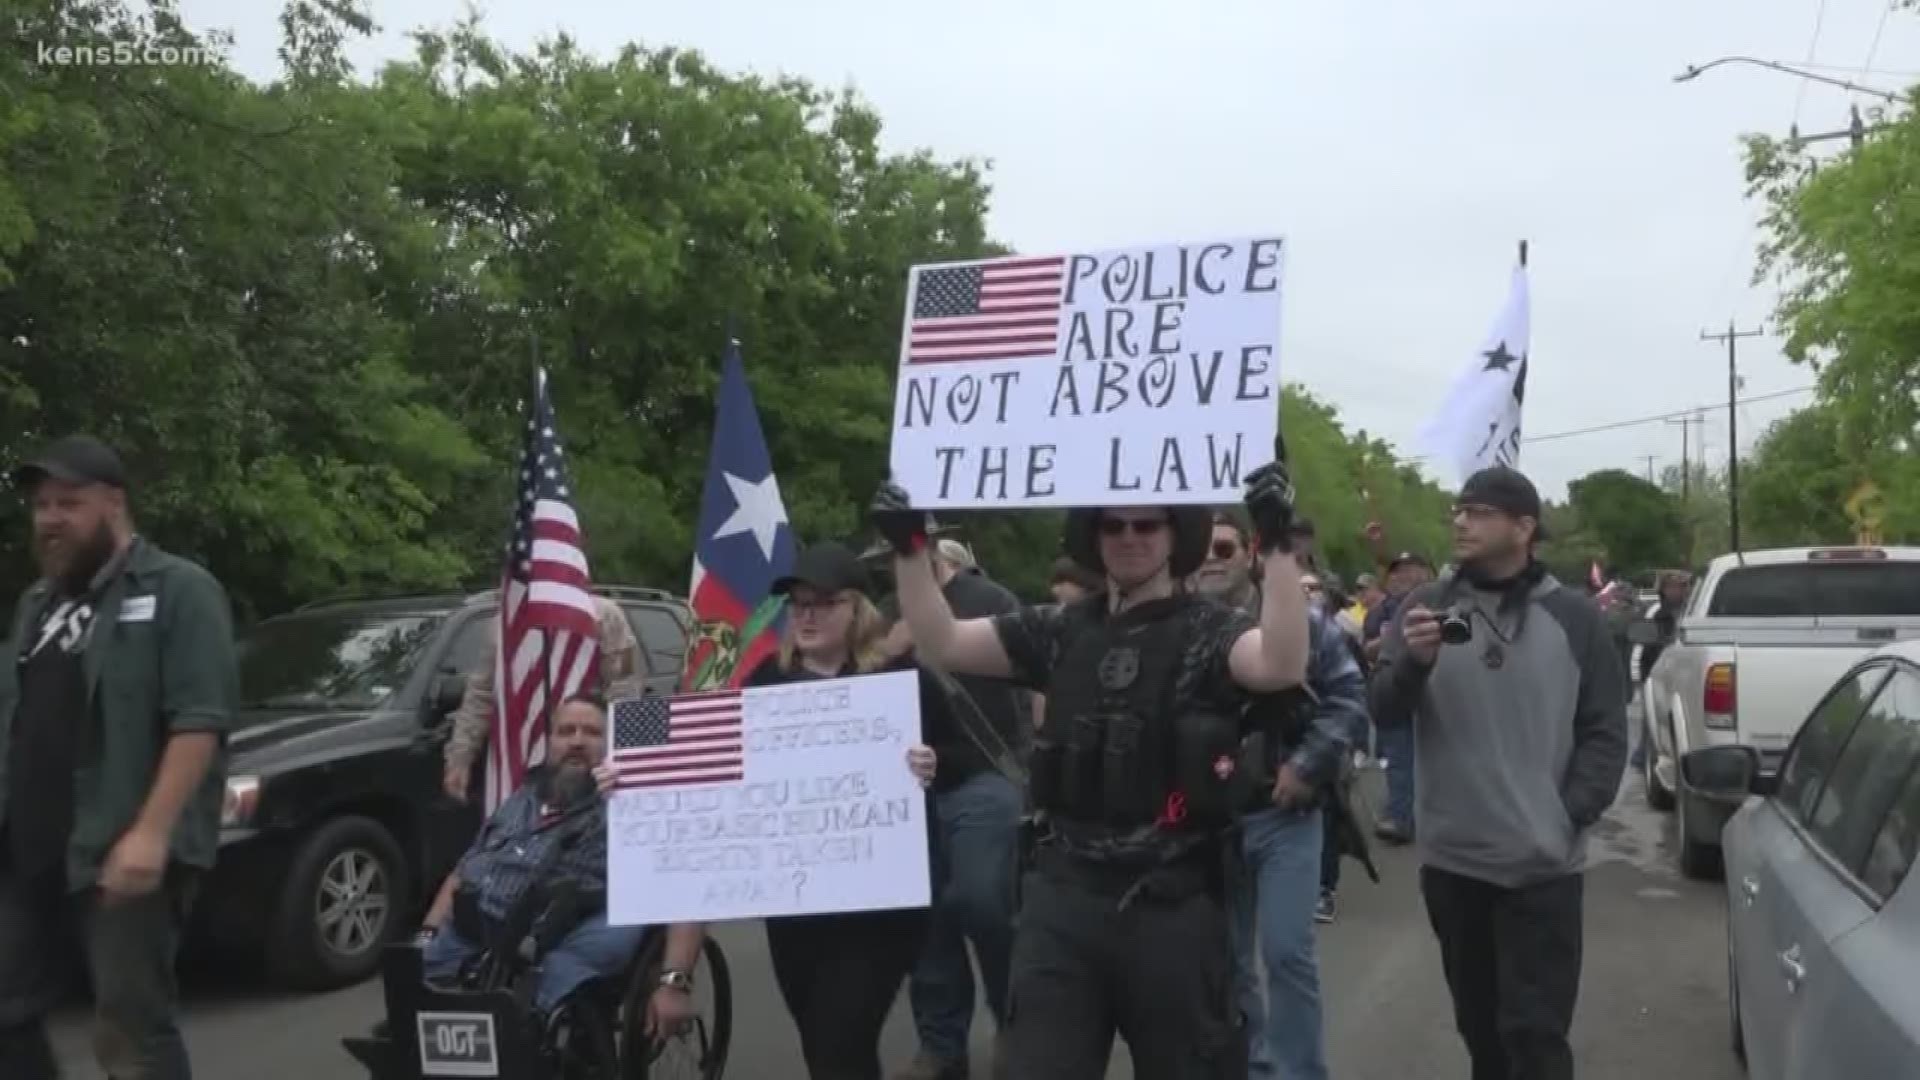 Citizens from across Texas took to the Olmos Park streets on Saturday, carrying their weapons openly and proudly.